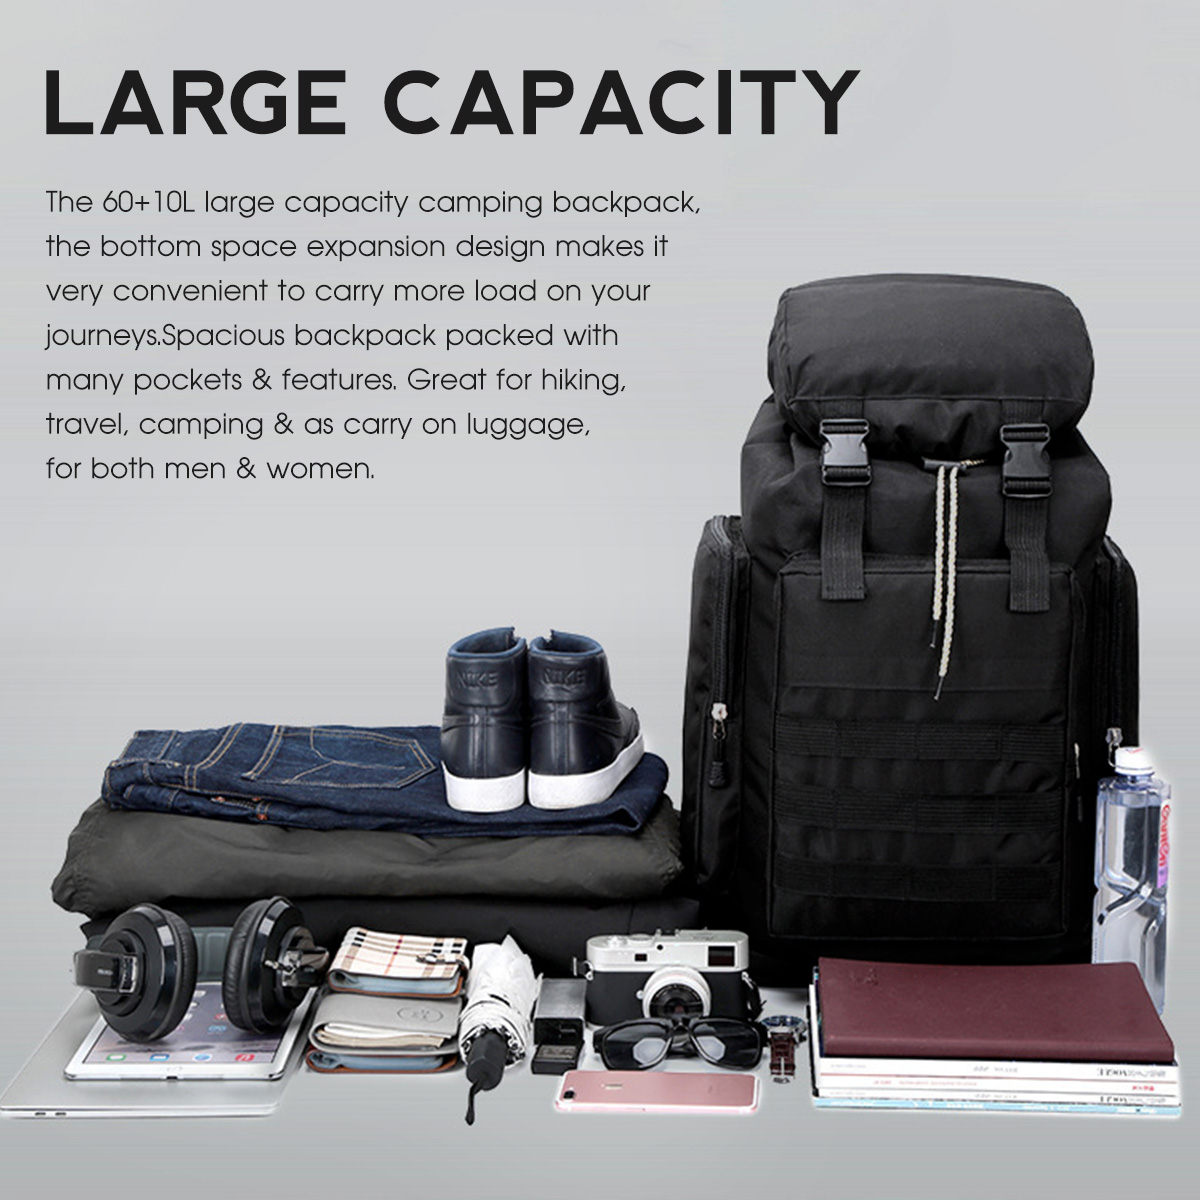 60L10L-Expanded-Large-Capacity-with-Mobile-Phone-Storage-Side-Bag-Outdoor-Hiking-Backpack-1869568-3